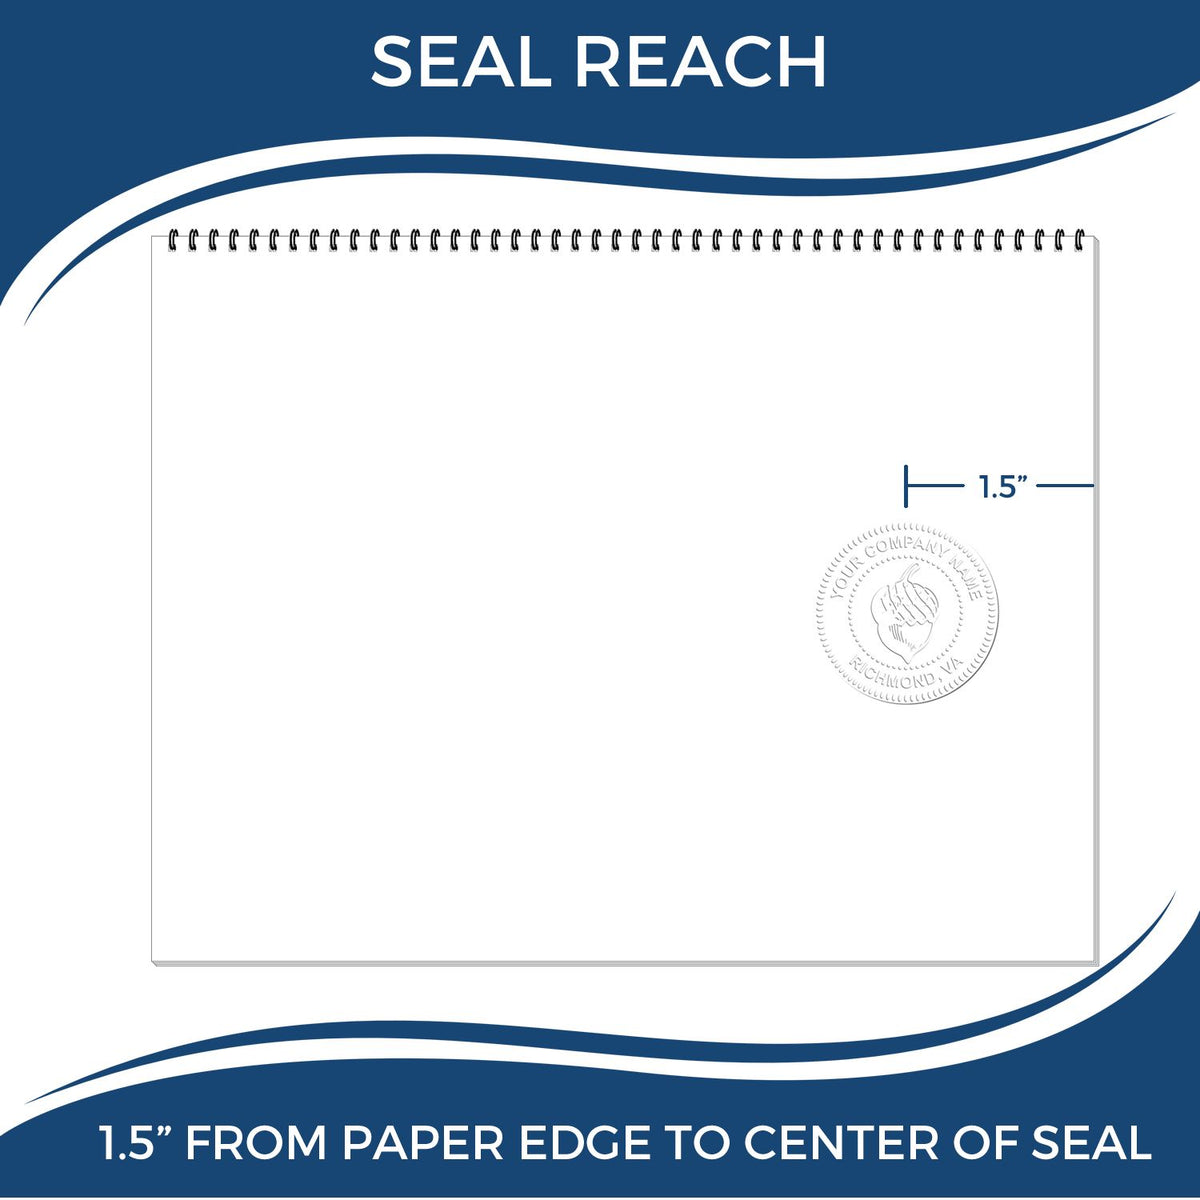 An infographic showing the seal reach which is represented by a ruler and a miniature seal image of the Hybrid District of Columbia Geologist Seal